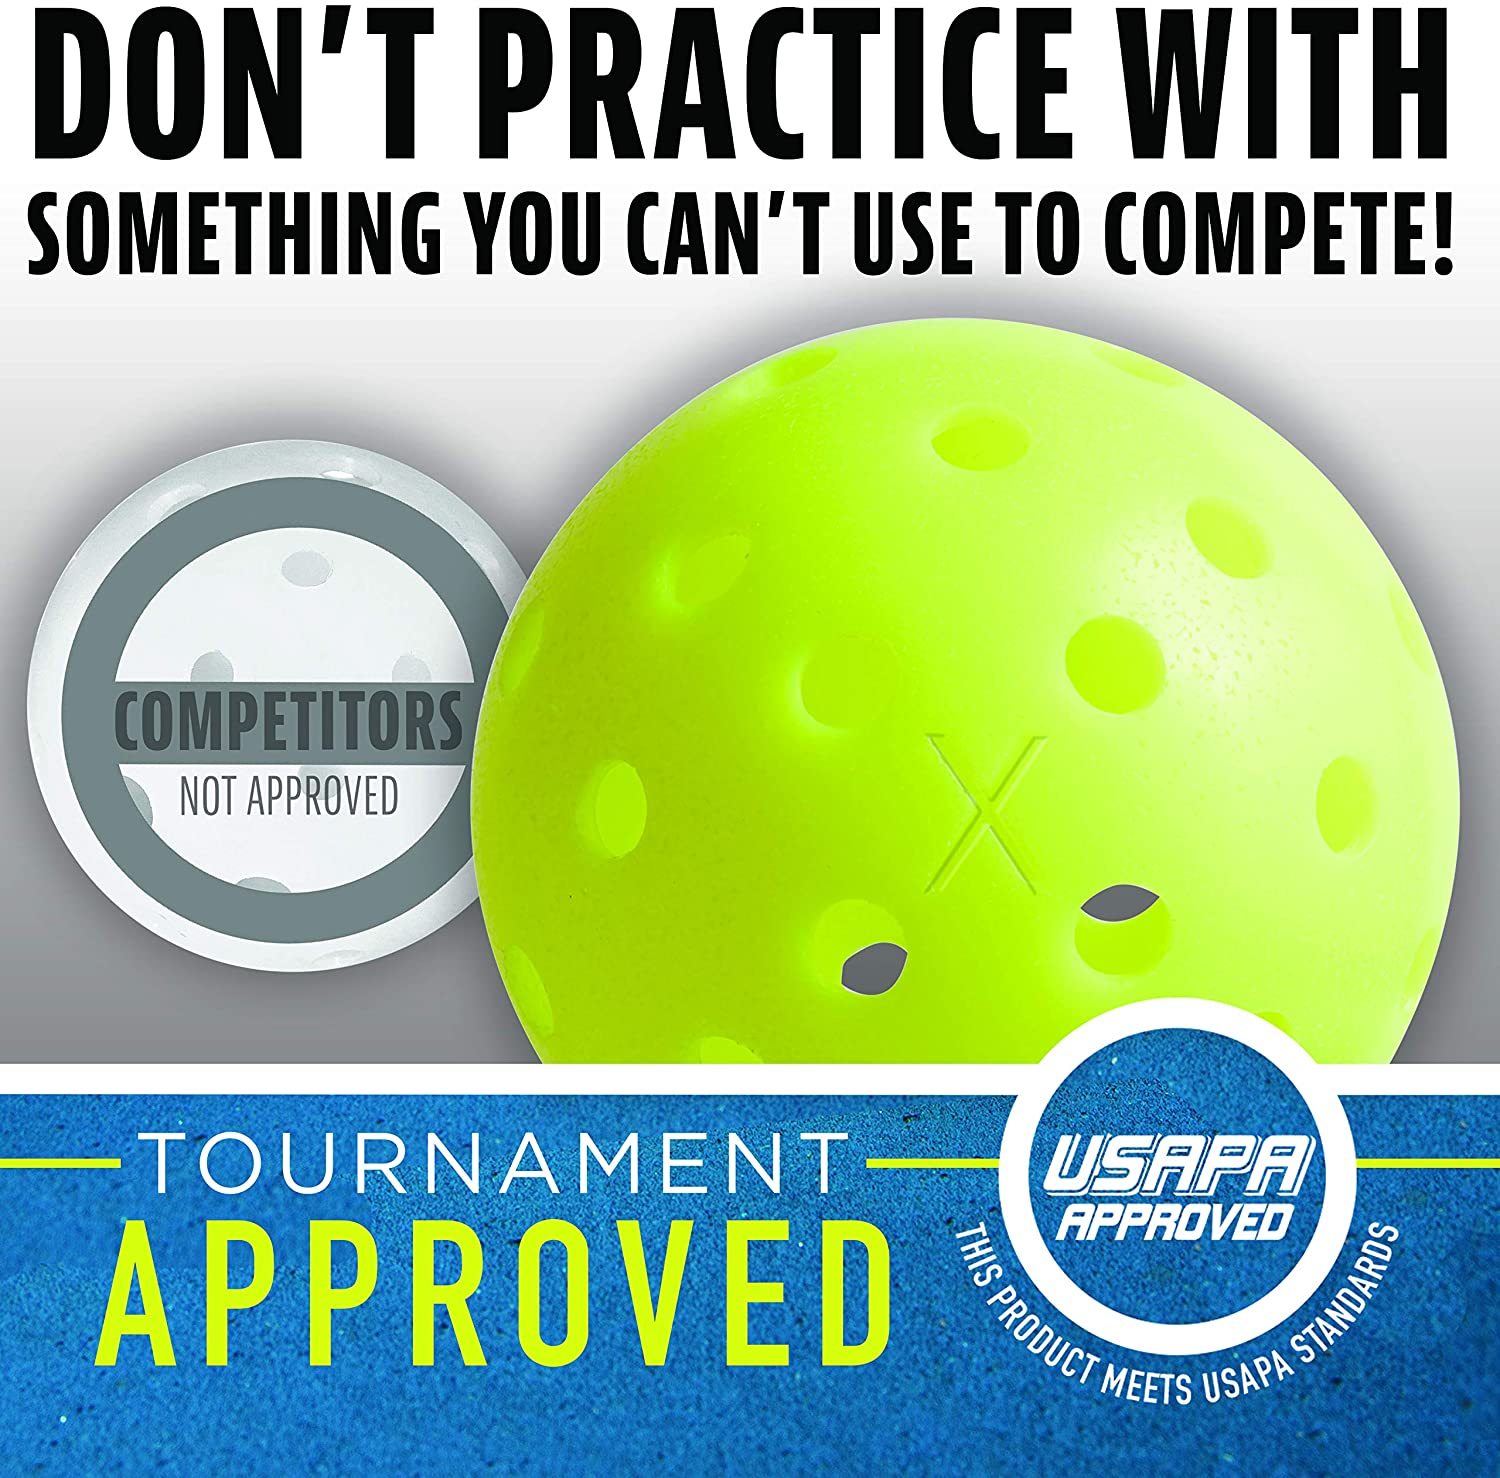 Don't practice with Franklin X-40 Outdoor Pickleball Balls if you can't use them.